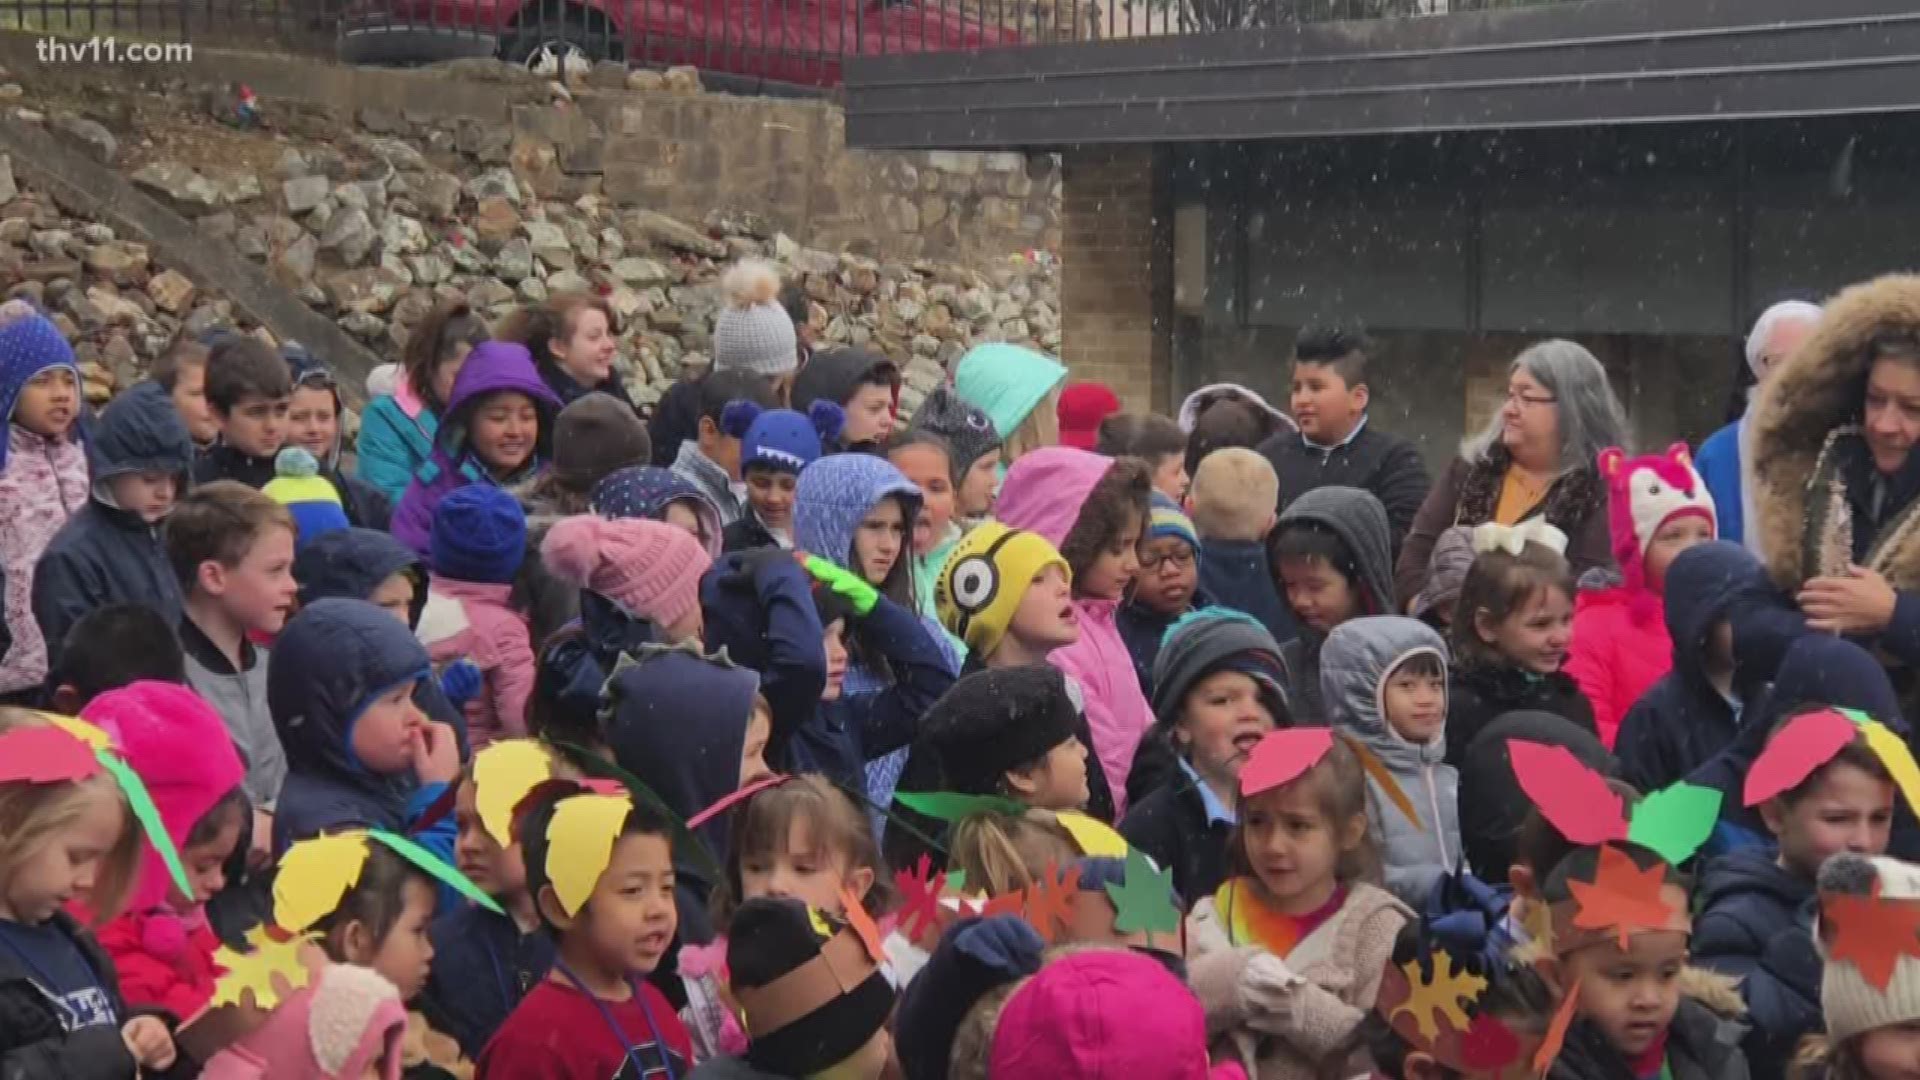 The snow didn't bother this group of kids at St. John's Catholic School in Hot Springs.